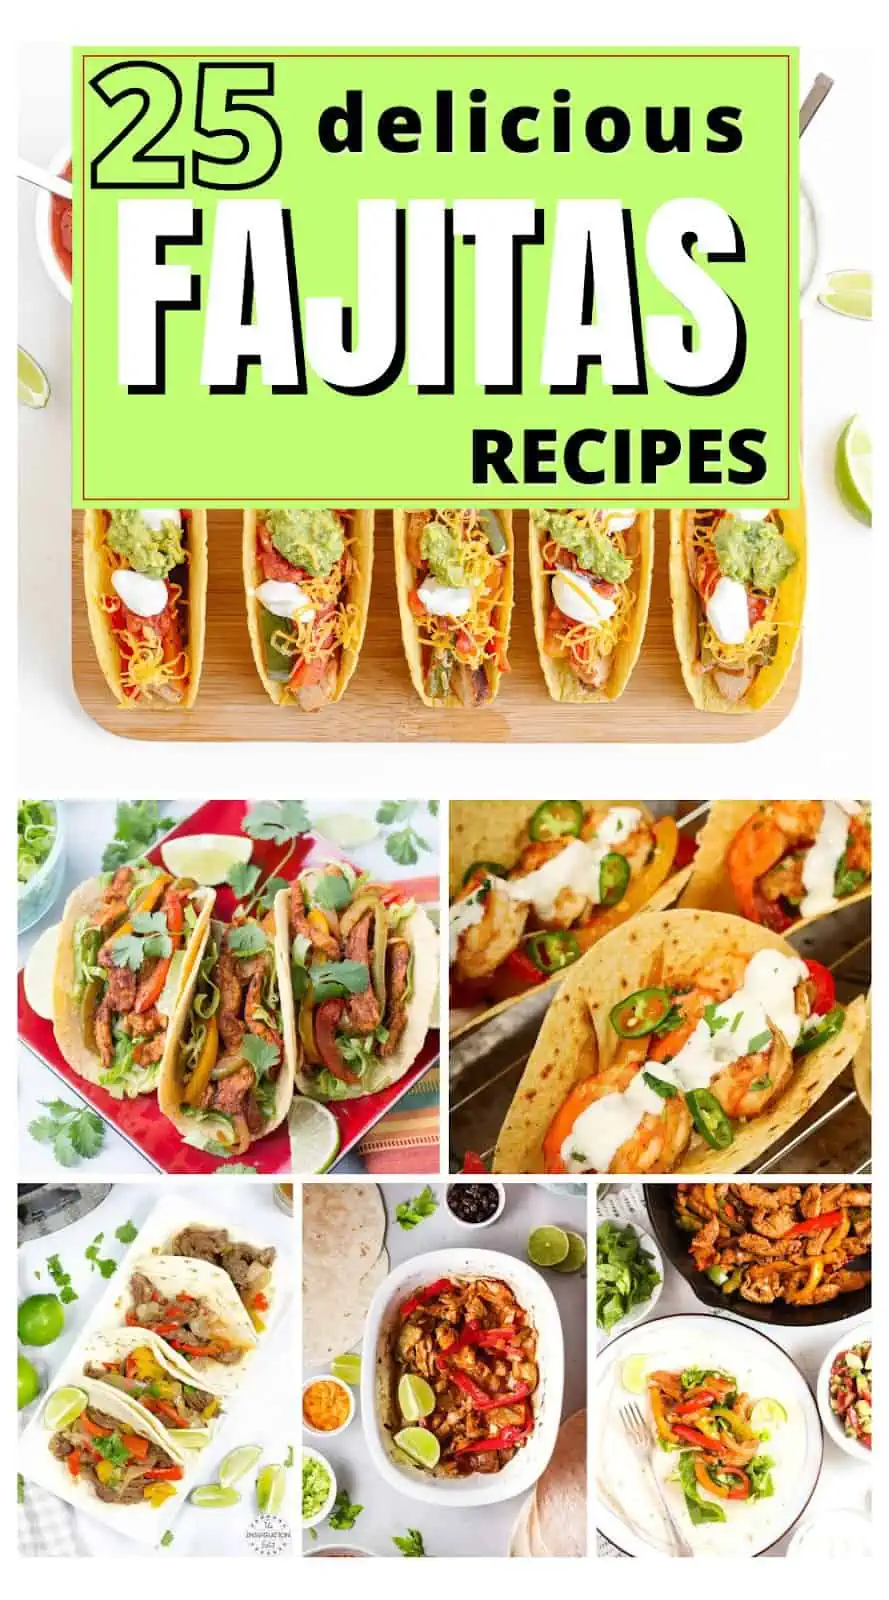 Easy fajitas recipes with different toppings.